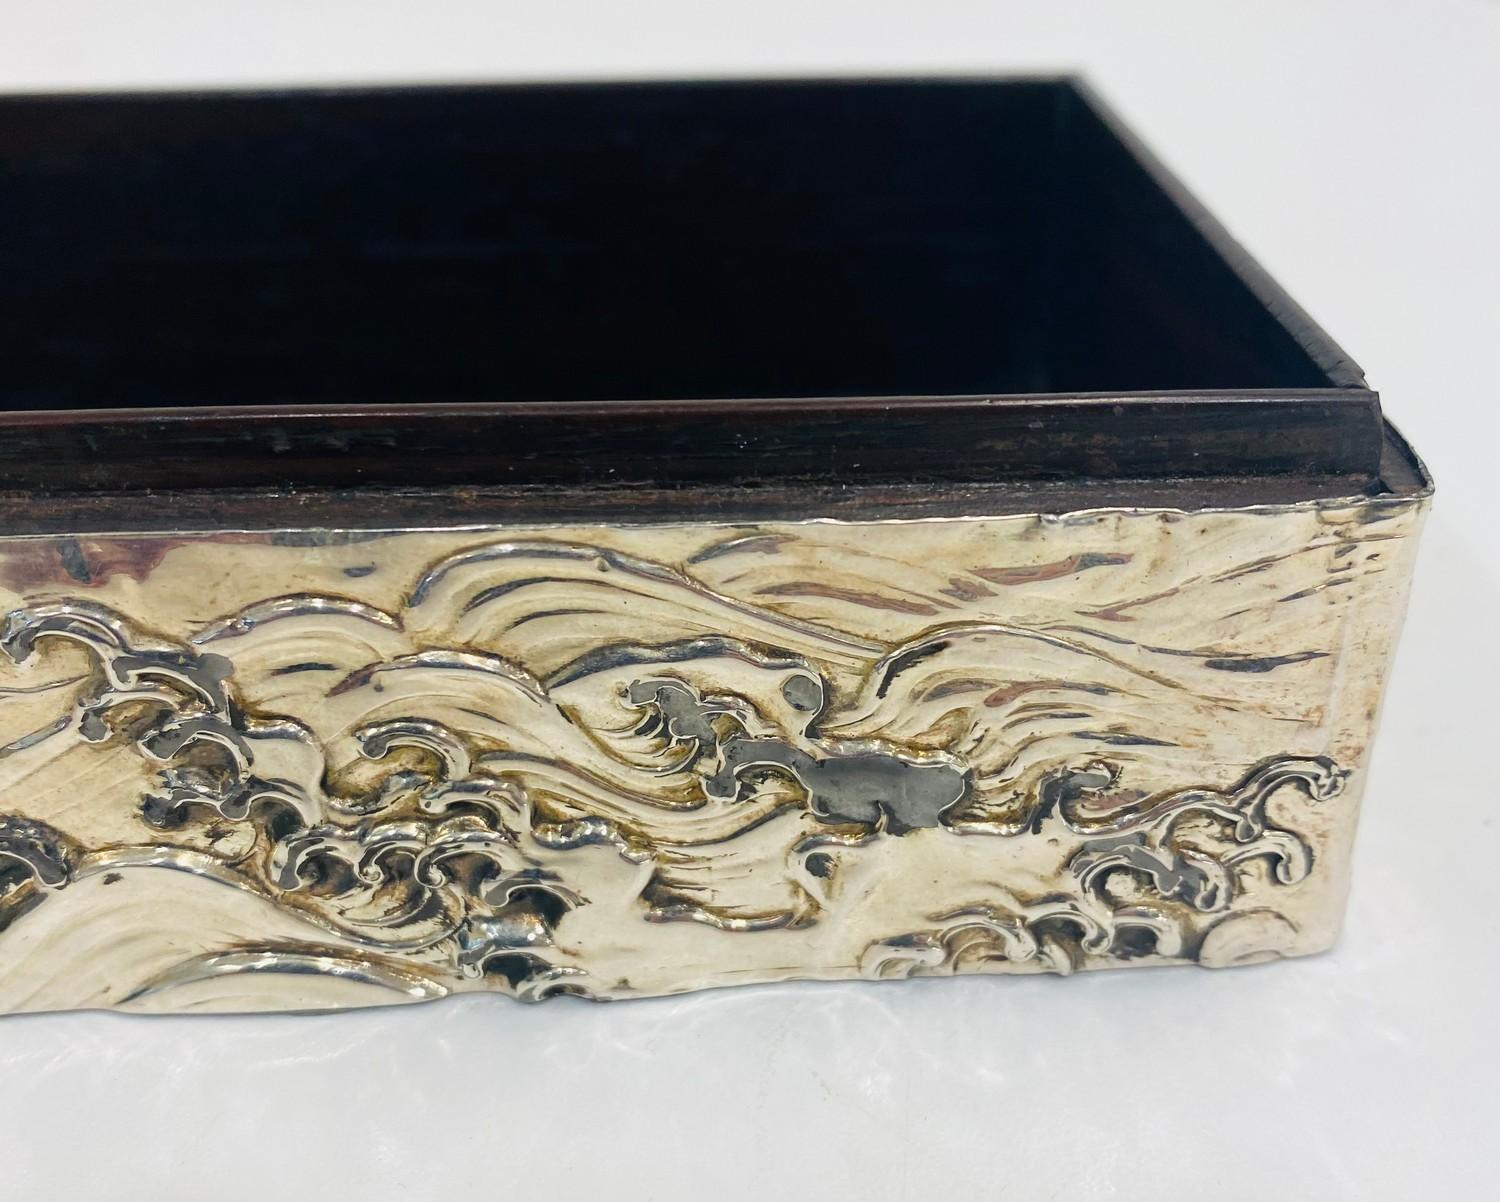 Silver and wooden cigarette box, Chinese detail, no markings but tested as silver, age related wear, - Image 4 of 5